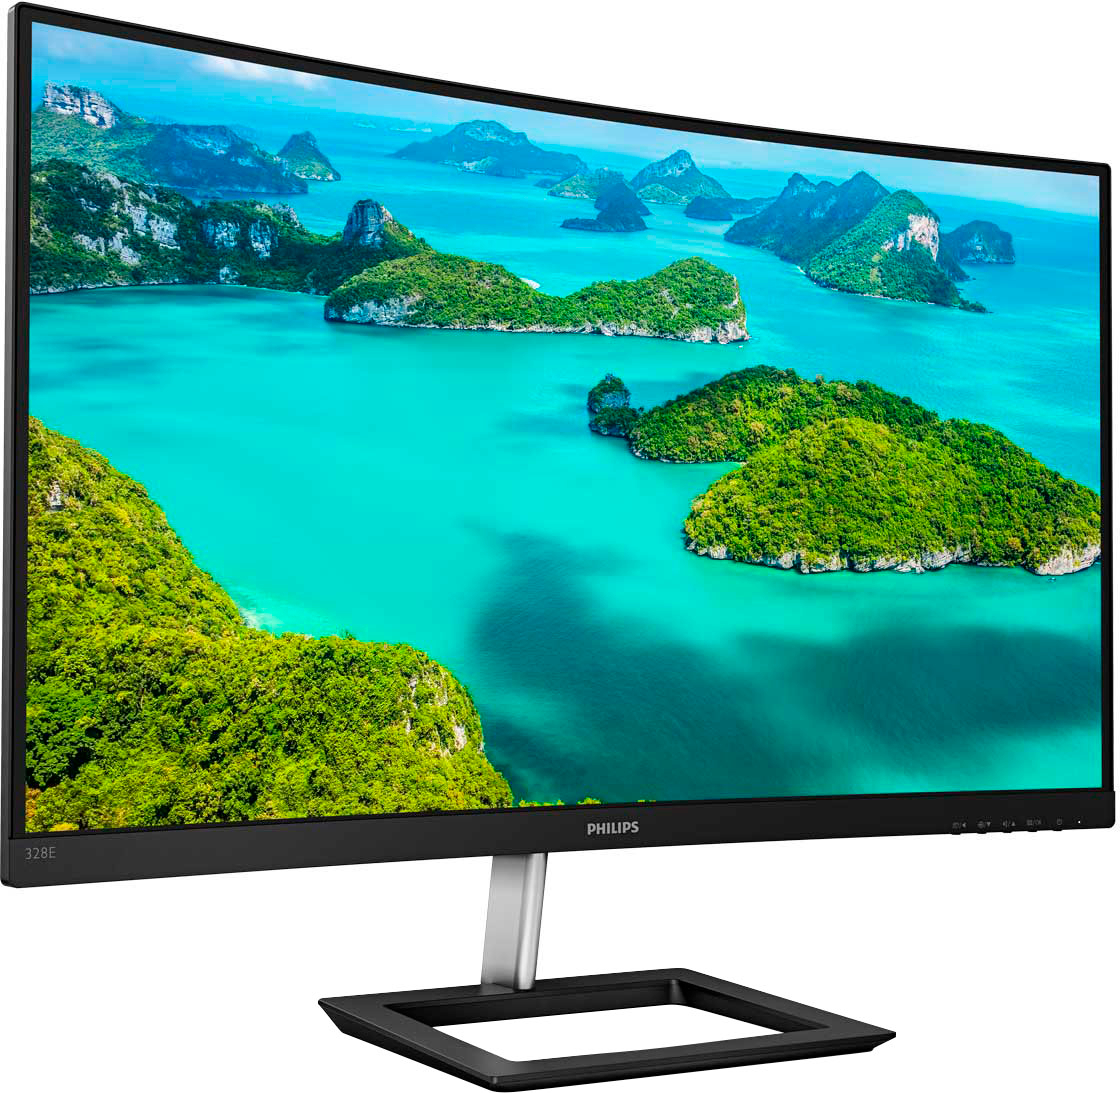 Angle View: Samsung - 27" M50B FHD Smart Monitor with Streaming TV - Black